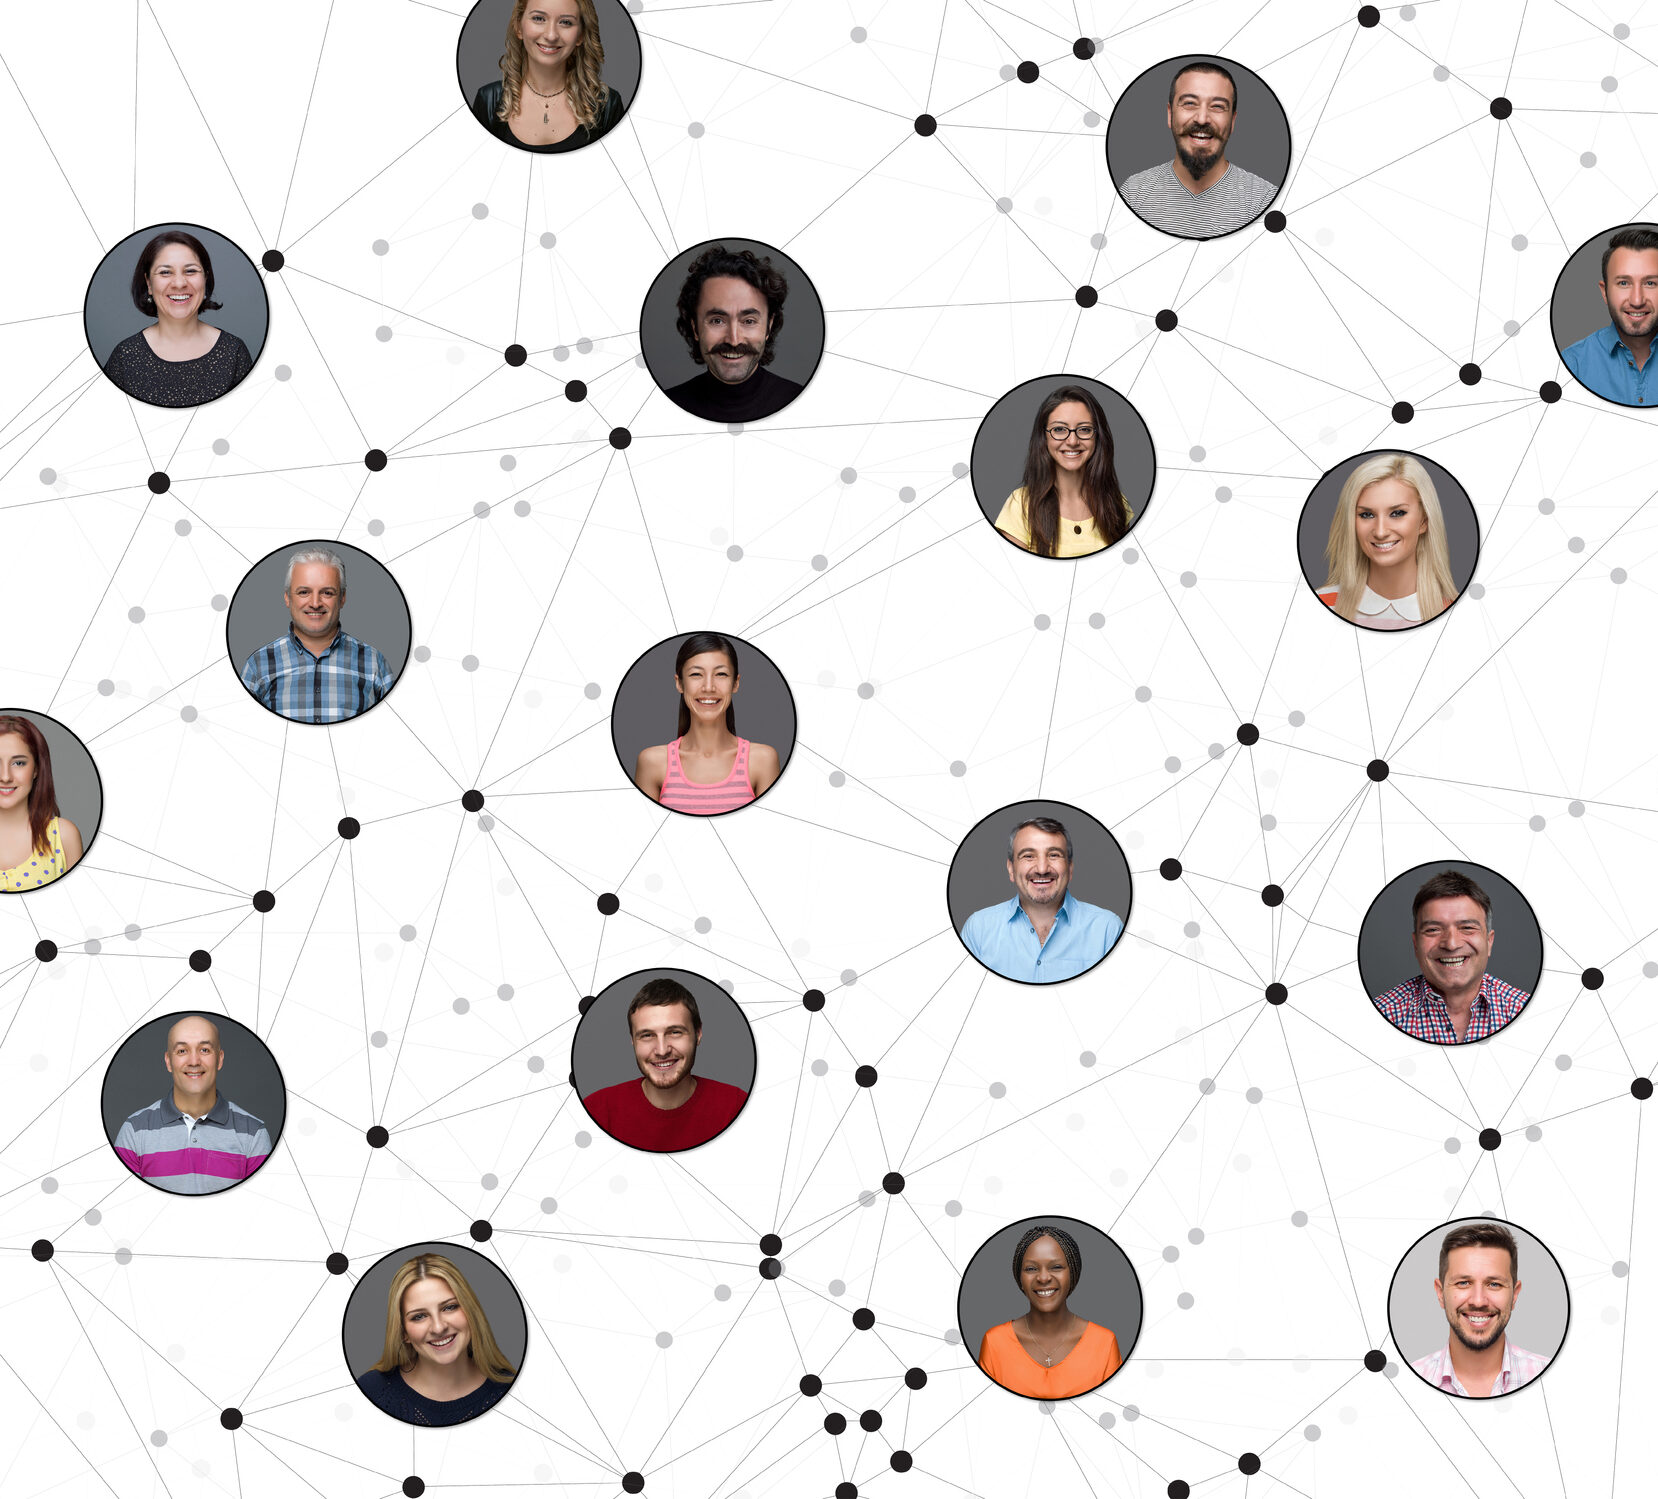 Networking portraits connected by lines, digitally generated image